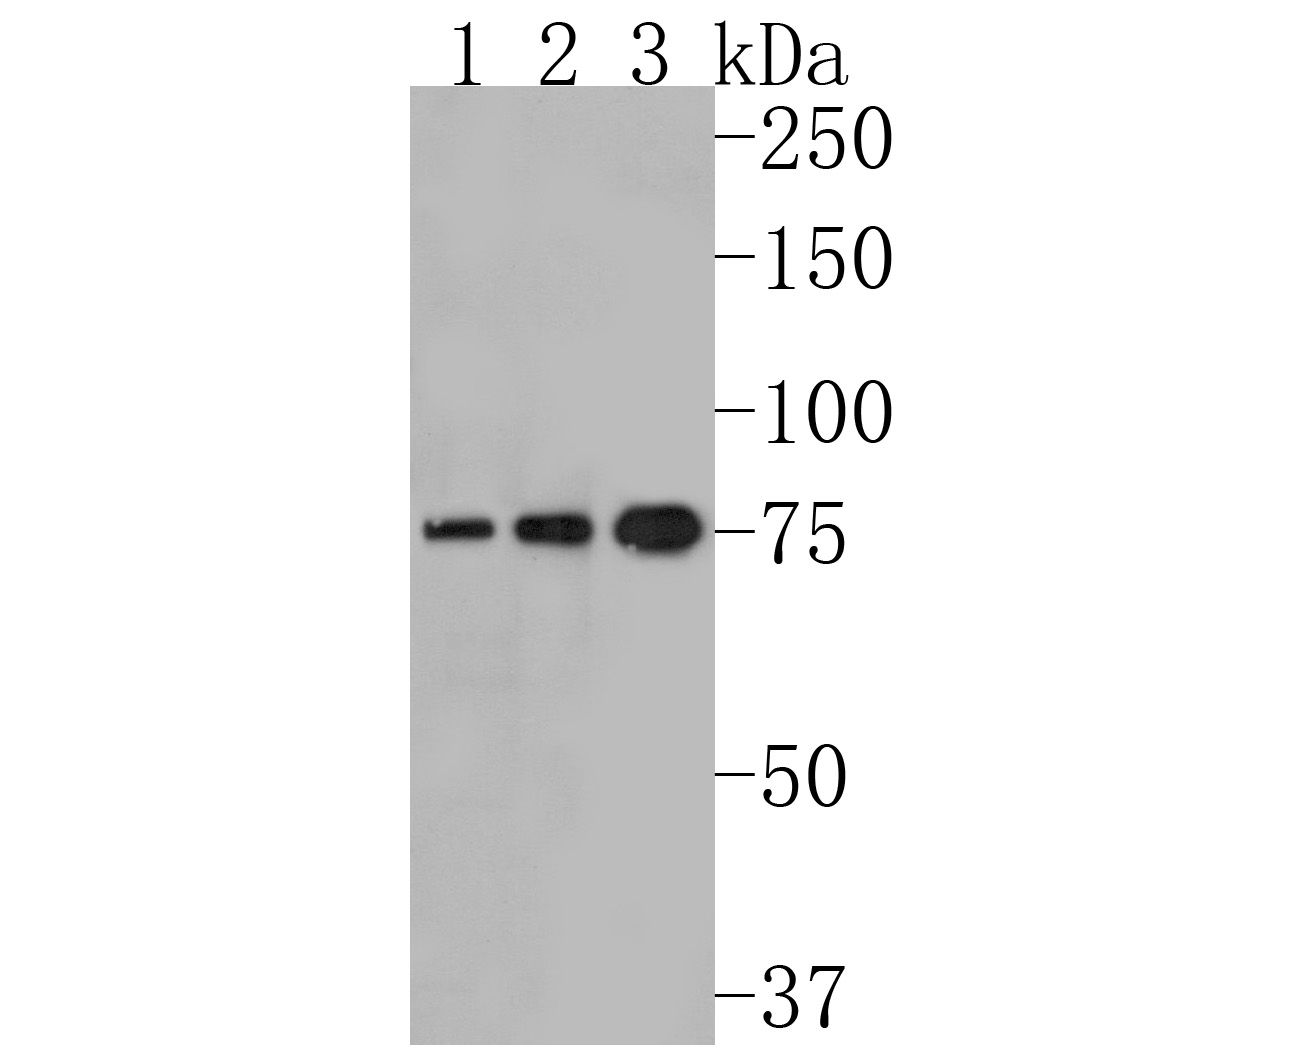 Western blot analysis of IRAK-1 on different lysates. Proteins were transferred to a PVDF membrane and blocked with 5% NFDM/TBST for 1 hour at room temperature. The primary antibody (HA720079, 1/500) was used in 5% NFDM/TBST at room temperature for 2 hours. Goat Anti-Rabbit IgG - HRP Secondary Antibody (HA1001) at 1:200,000 dilution was used for 1 hour at room temperature.<br />
Positive control: <br />
Lane 1: Hela cell lysate<br />
Lane 2: K562 cell lysate<br />
Lane 3: 293 cell lysate